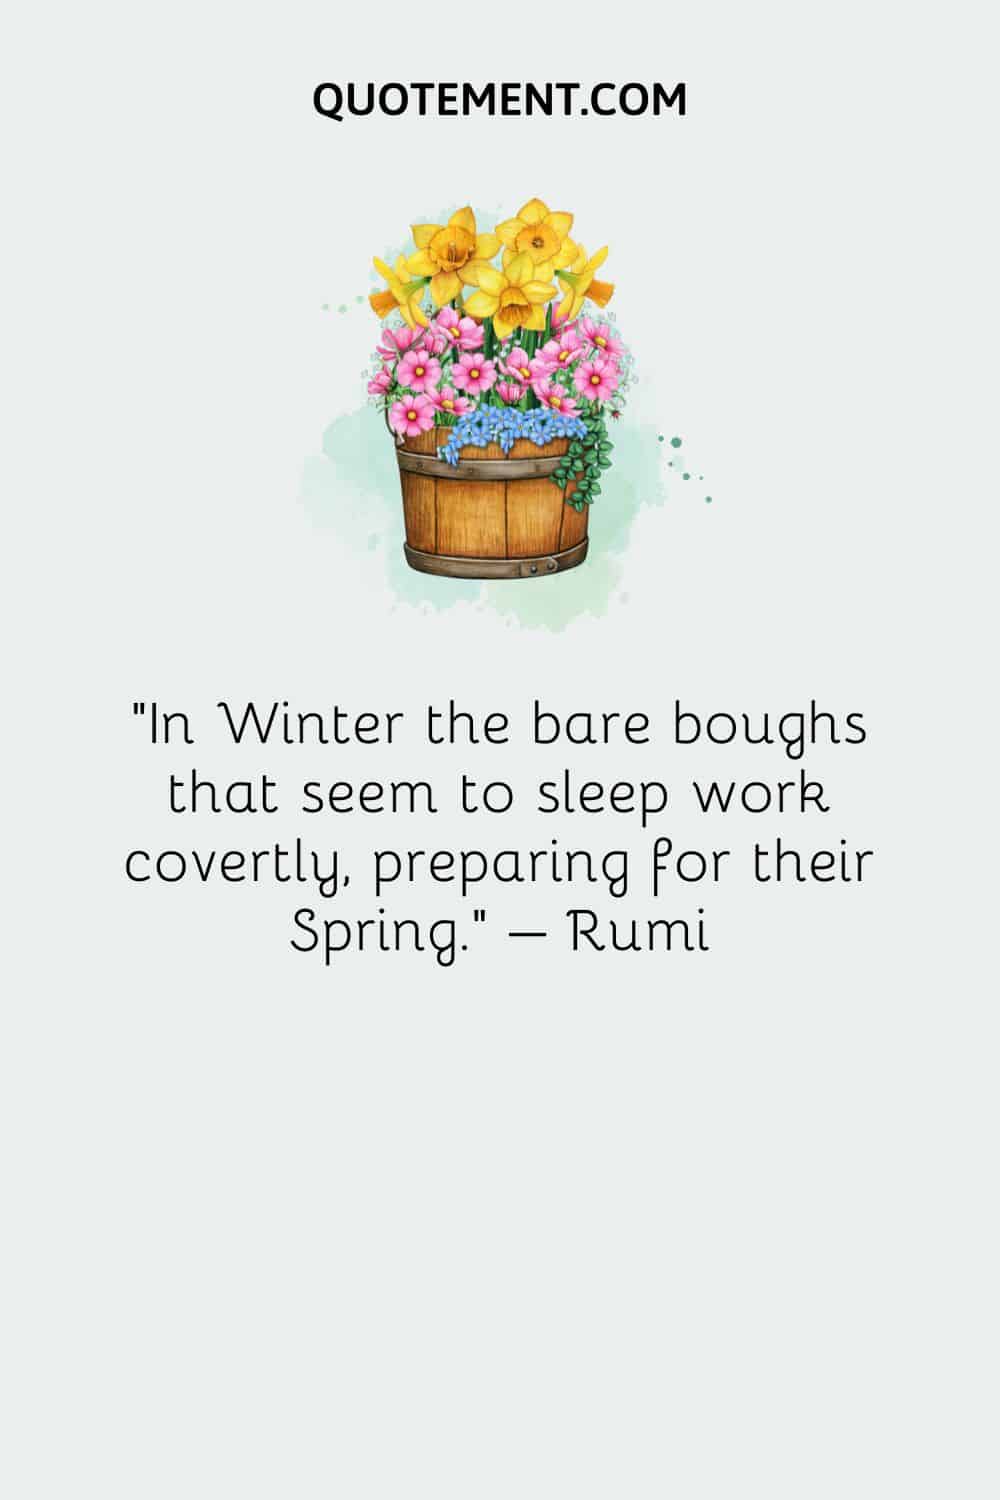 In Winter the bare boughs that seem to sleep work covertly, preparing for their Spring. – Rumi